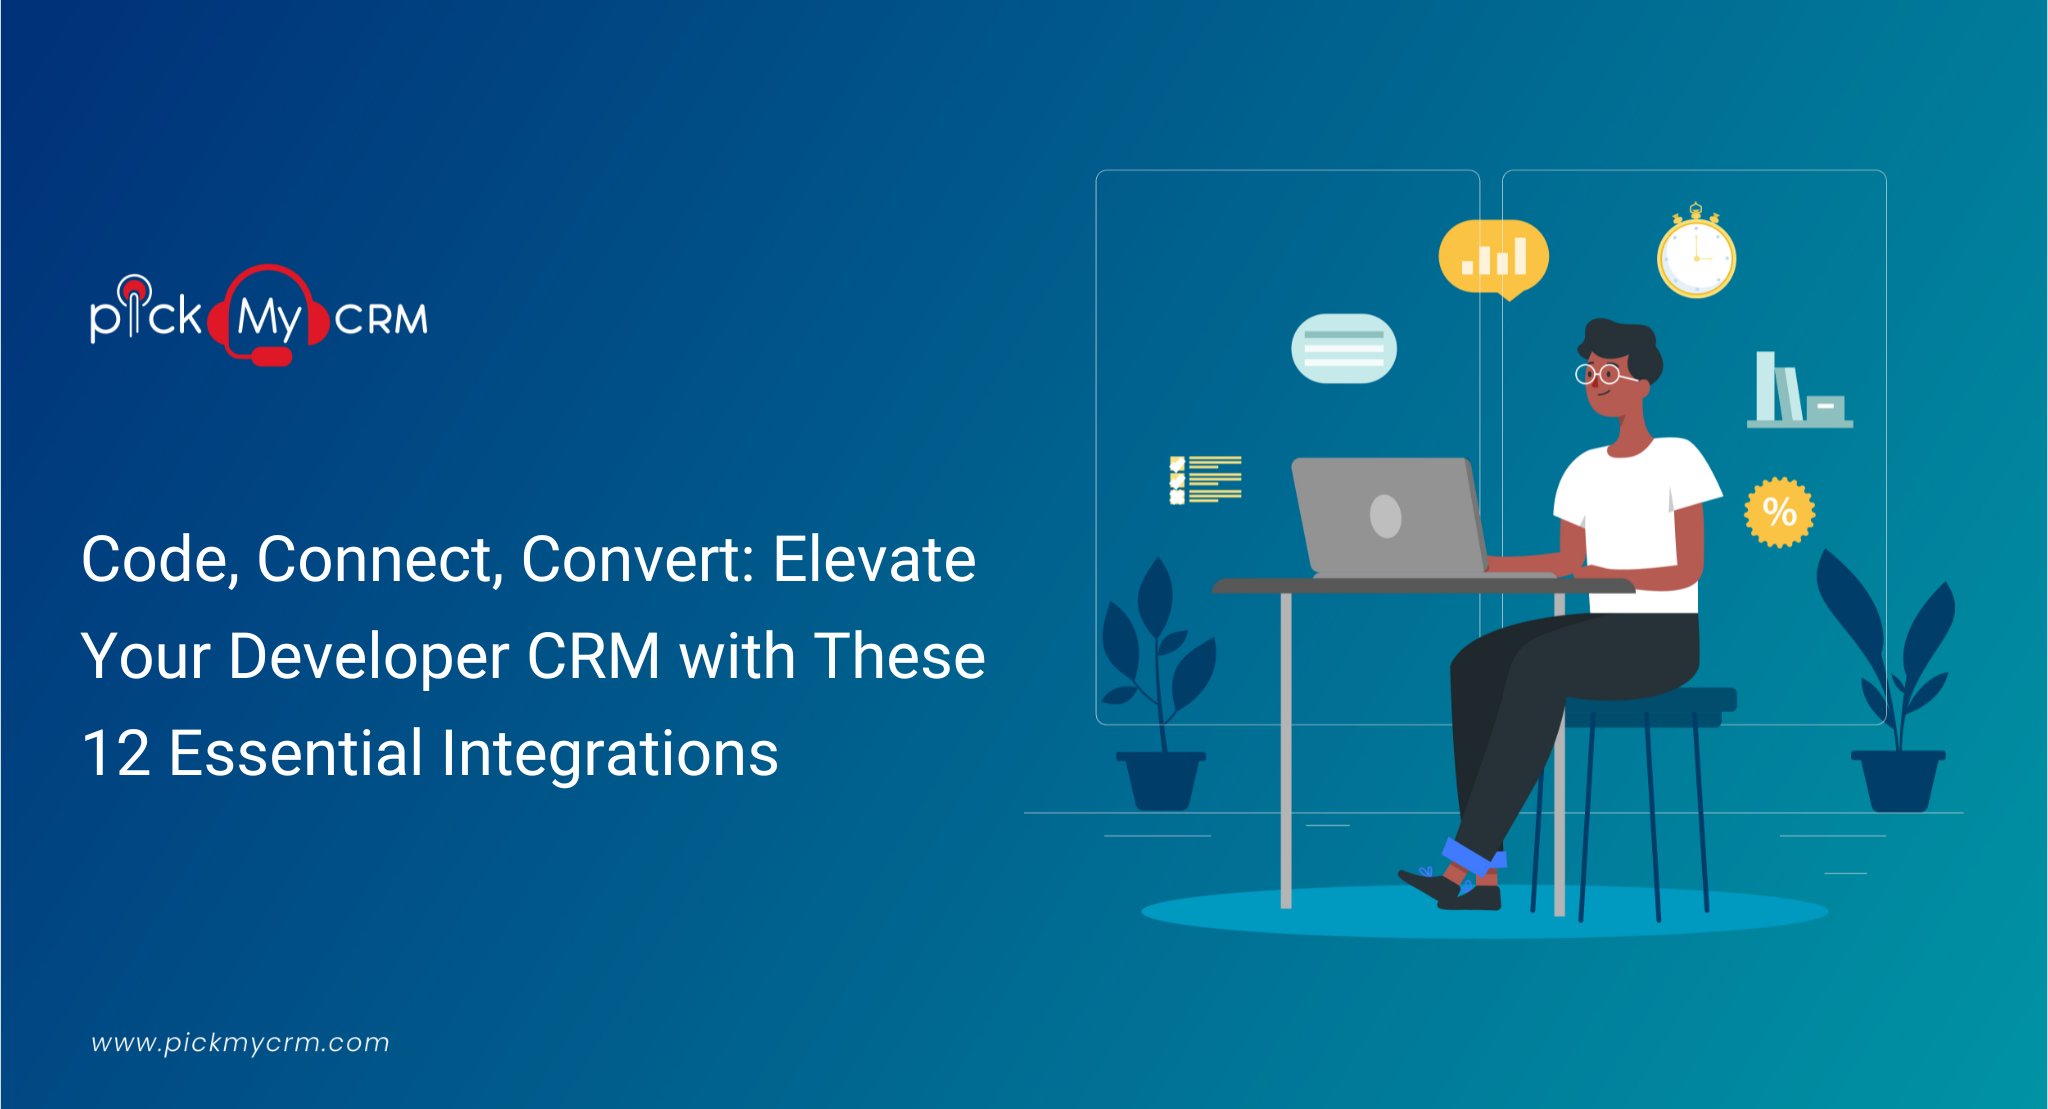 Code, Connect, Convert: Elevate Your Developer CRM with These 12 Essential Integrations